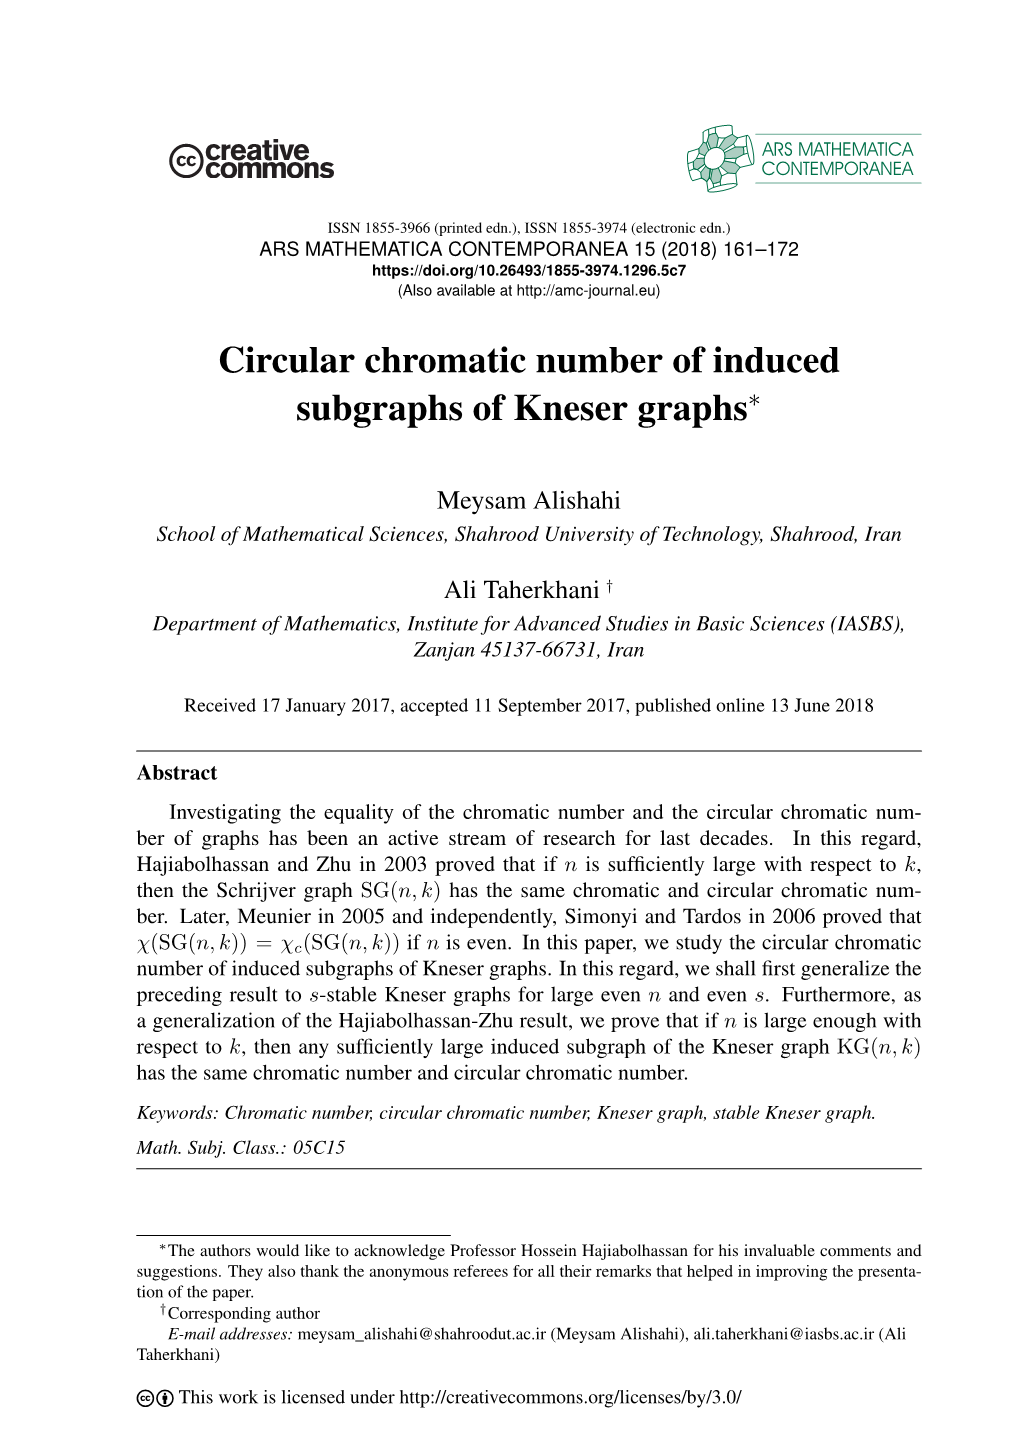 Circular Chromatic Number of Induced Subgraphs of Kneser Graphs∗